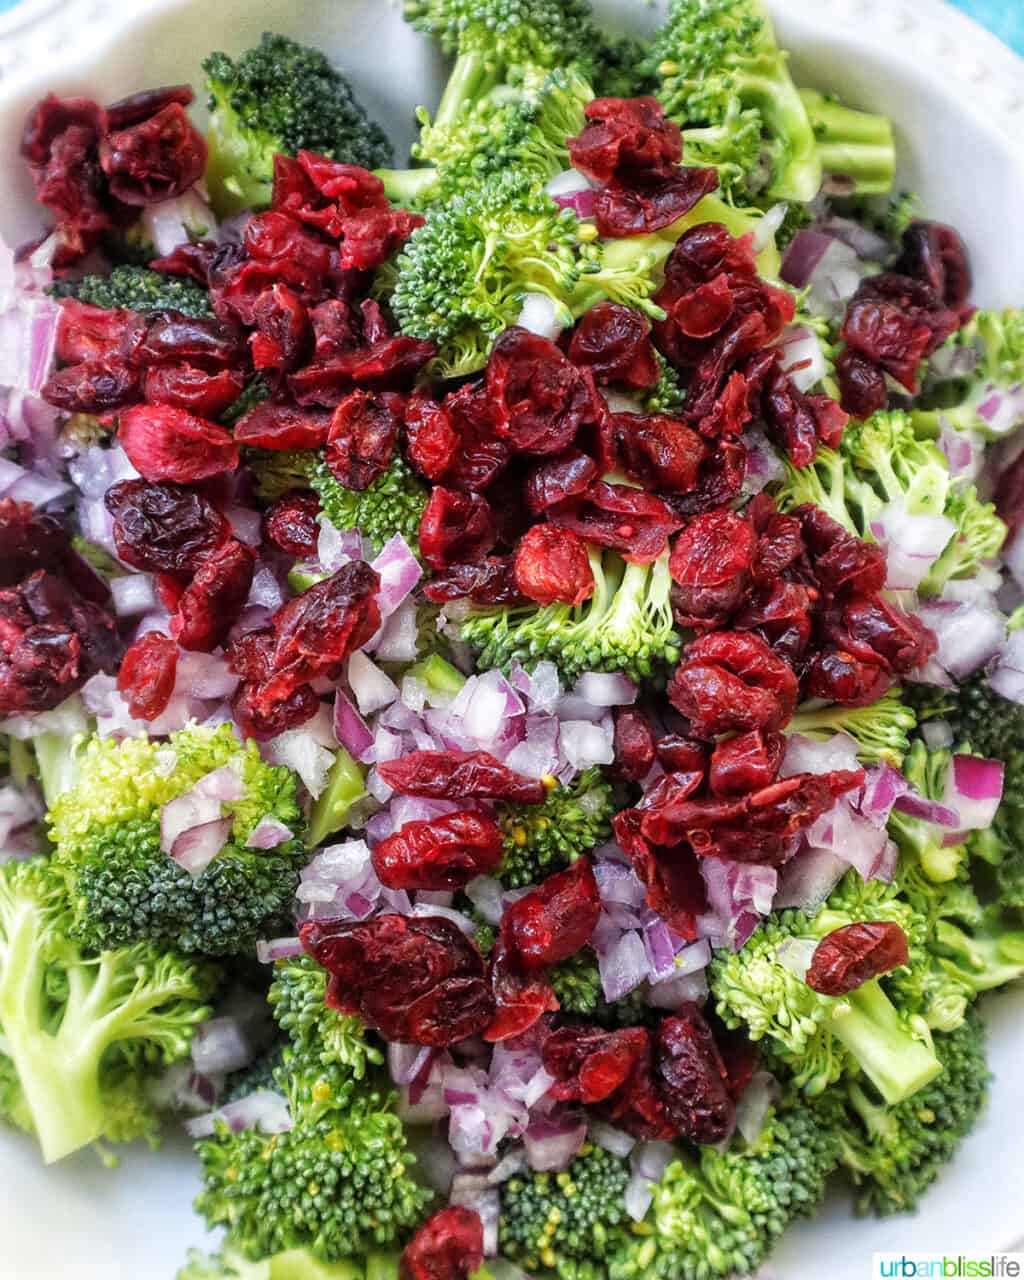 dried cranberries on top of broccoli crunch salad.